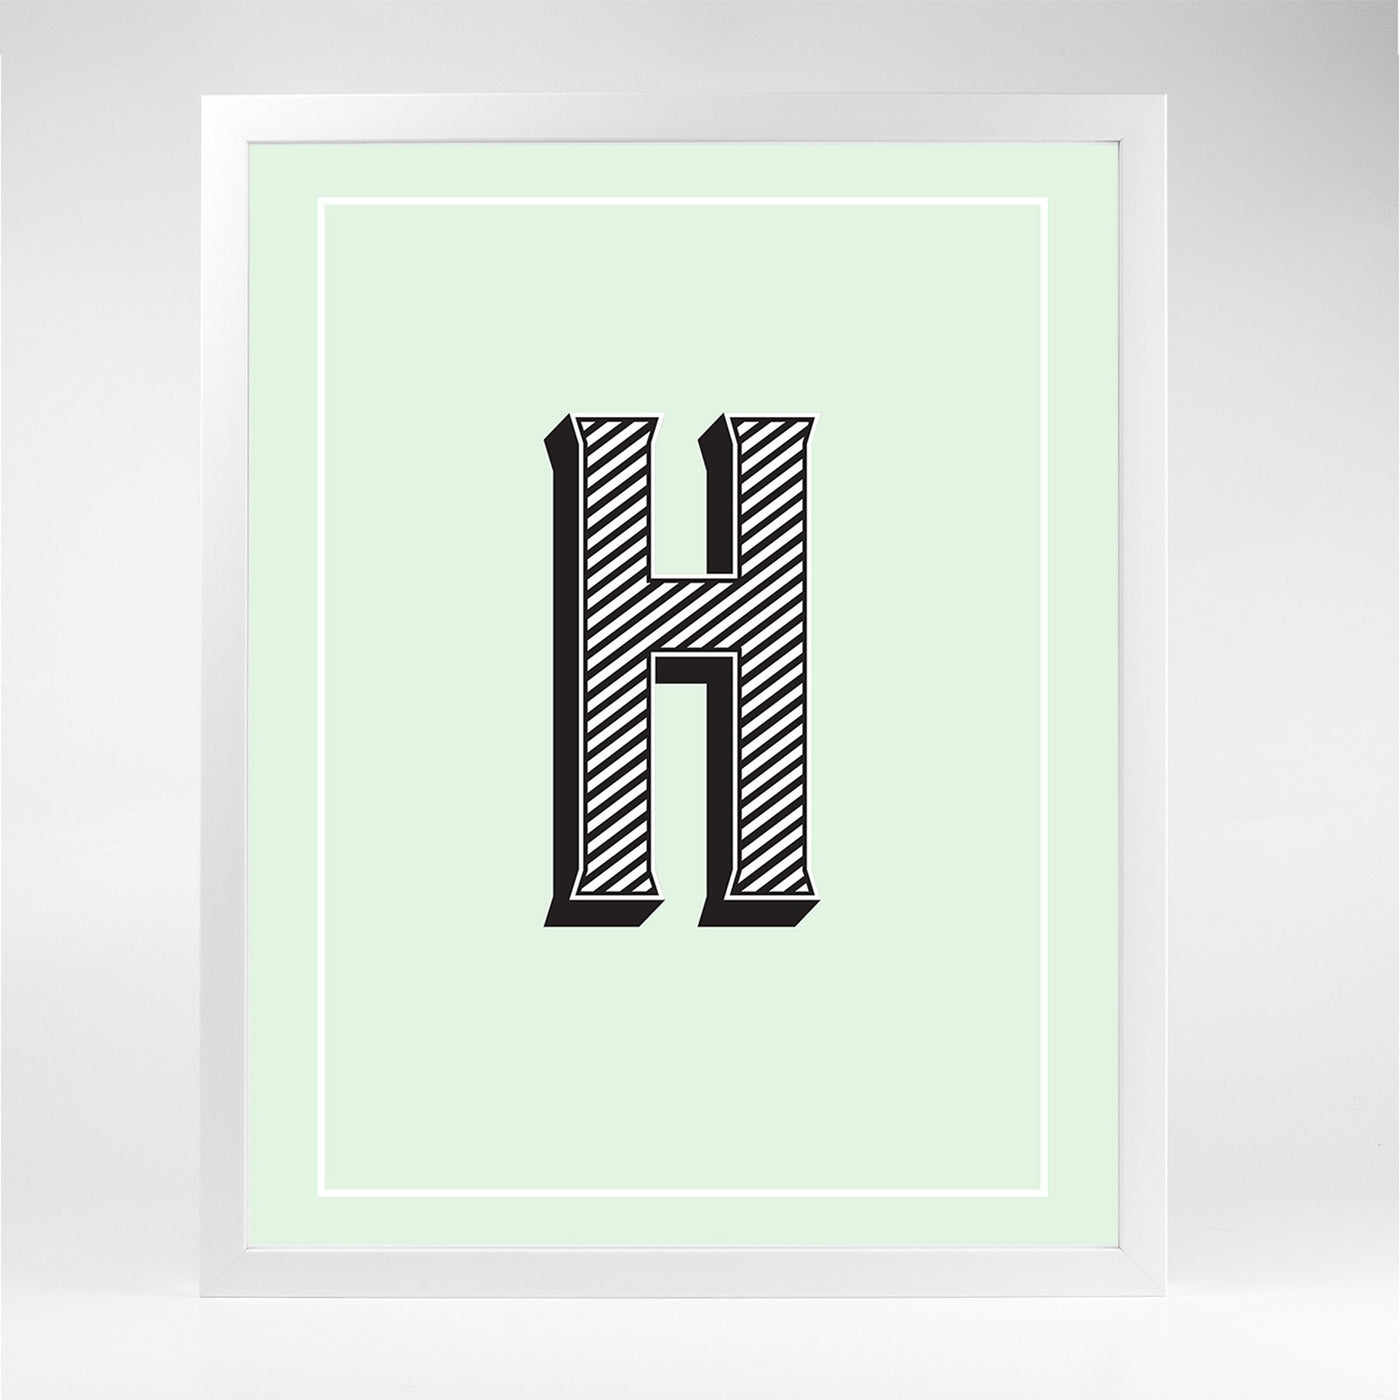 Gallery Prints H The Letter Series dombezalergii